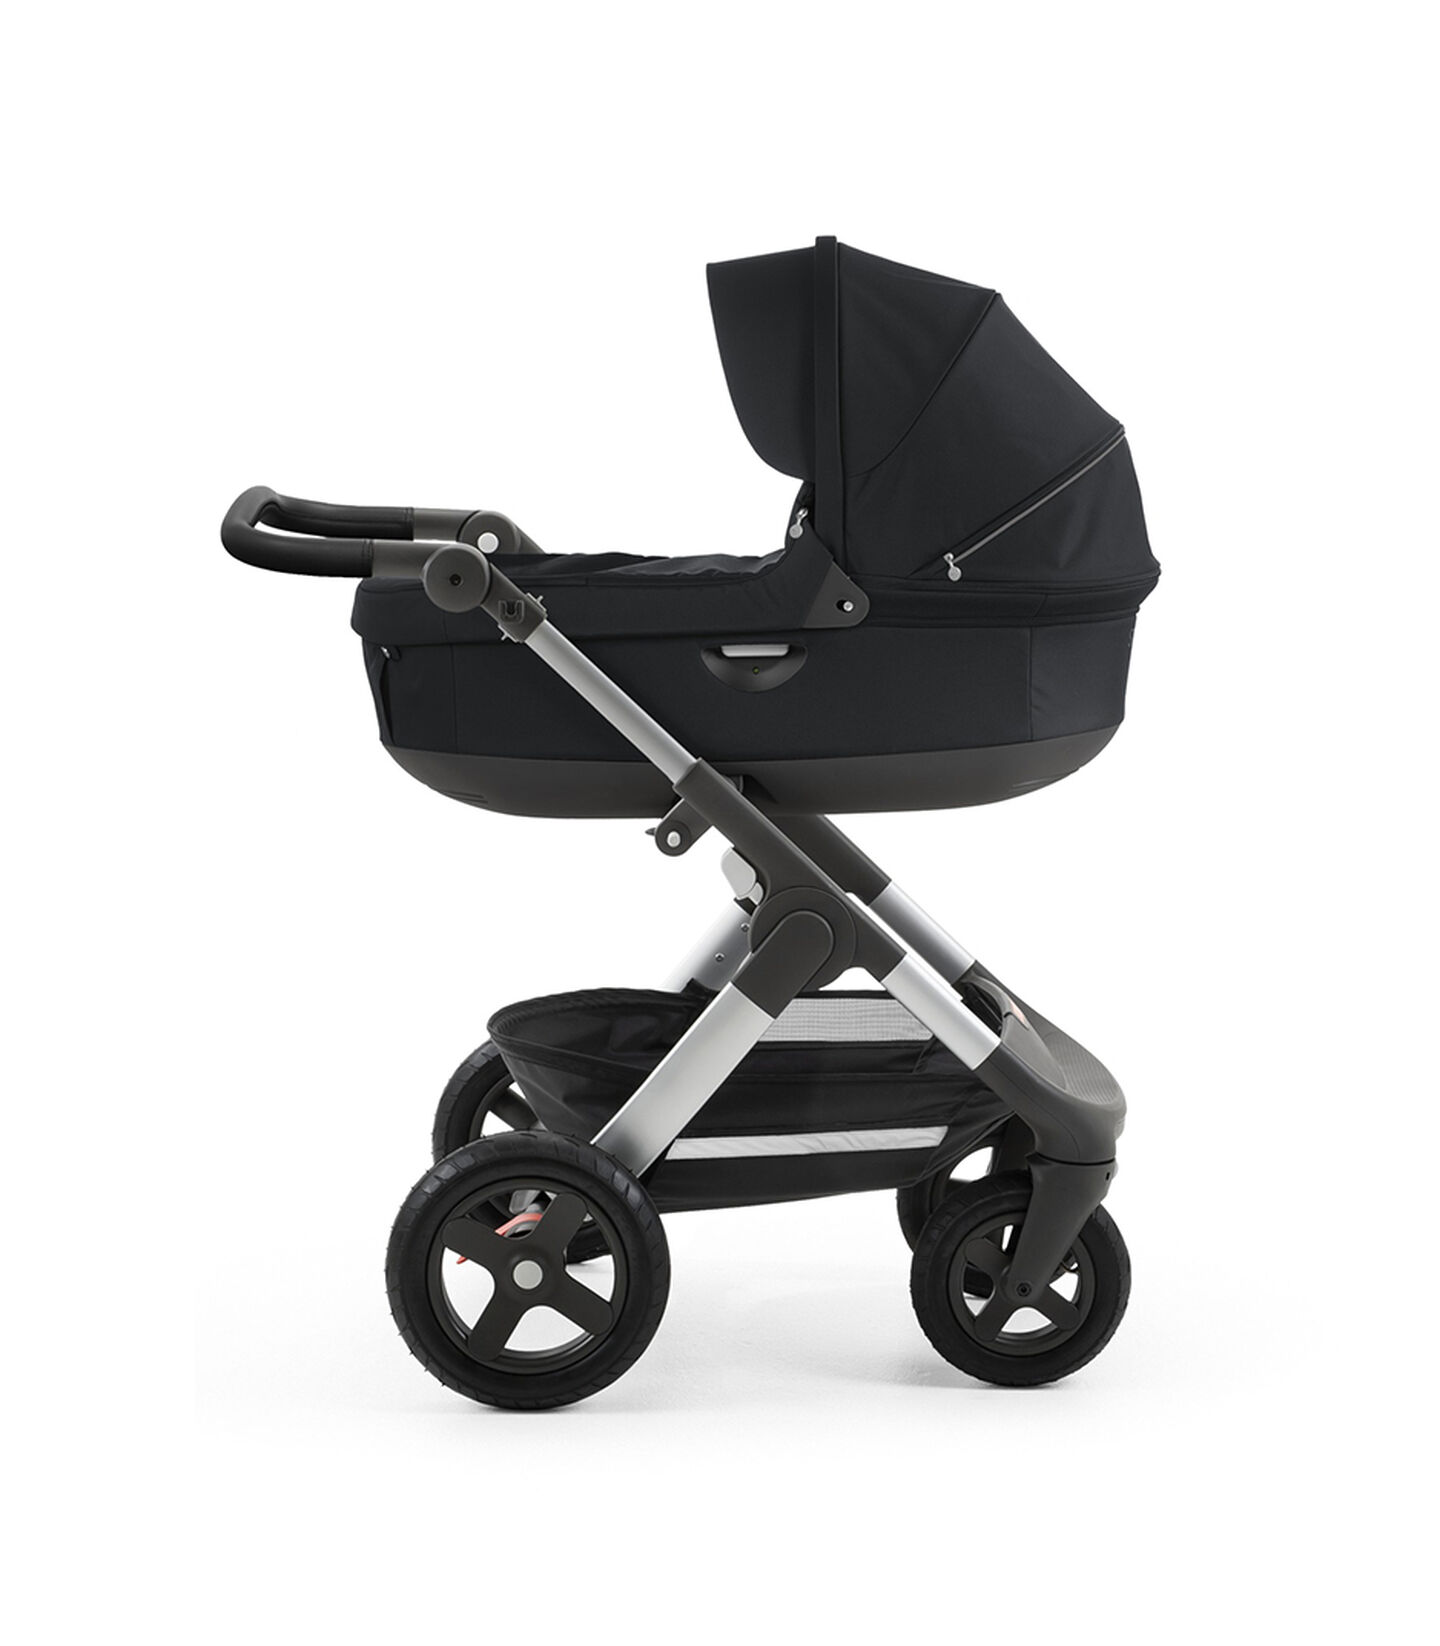 Stokke® Trailz™ with silver chassis  and Stokke® Stroller Carry Cot, Black. Leatherette Handle. view 2